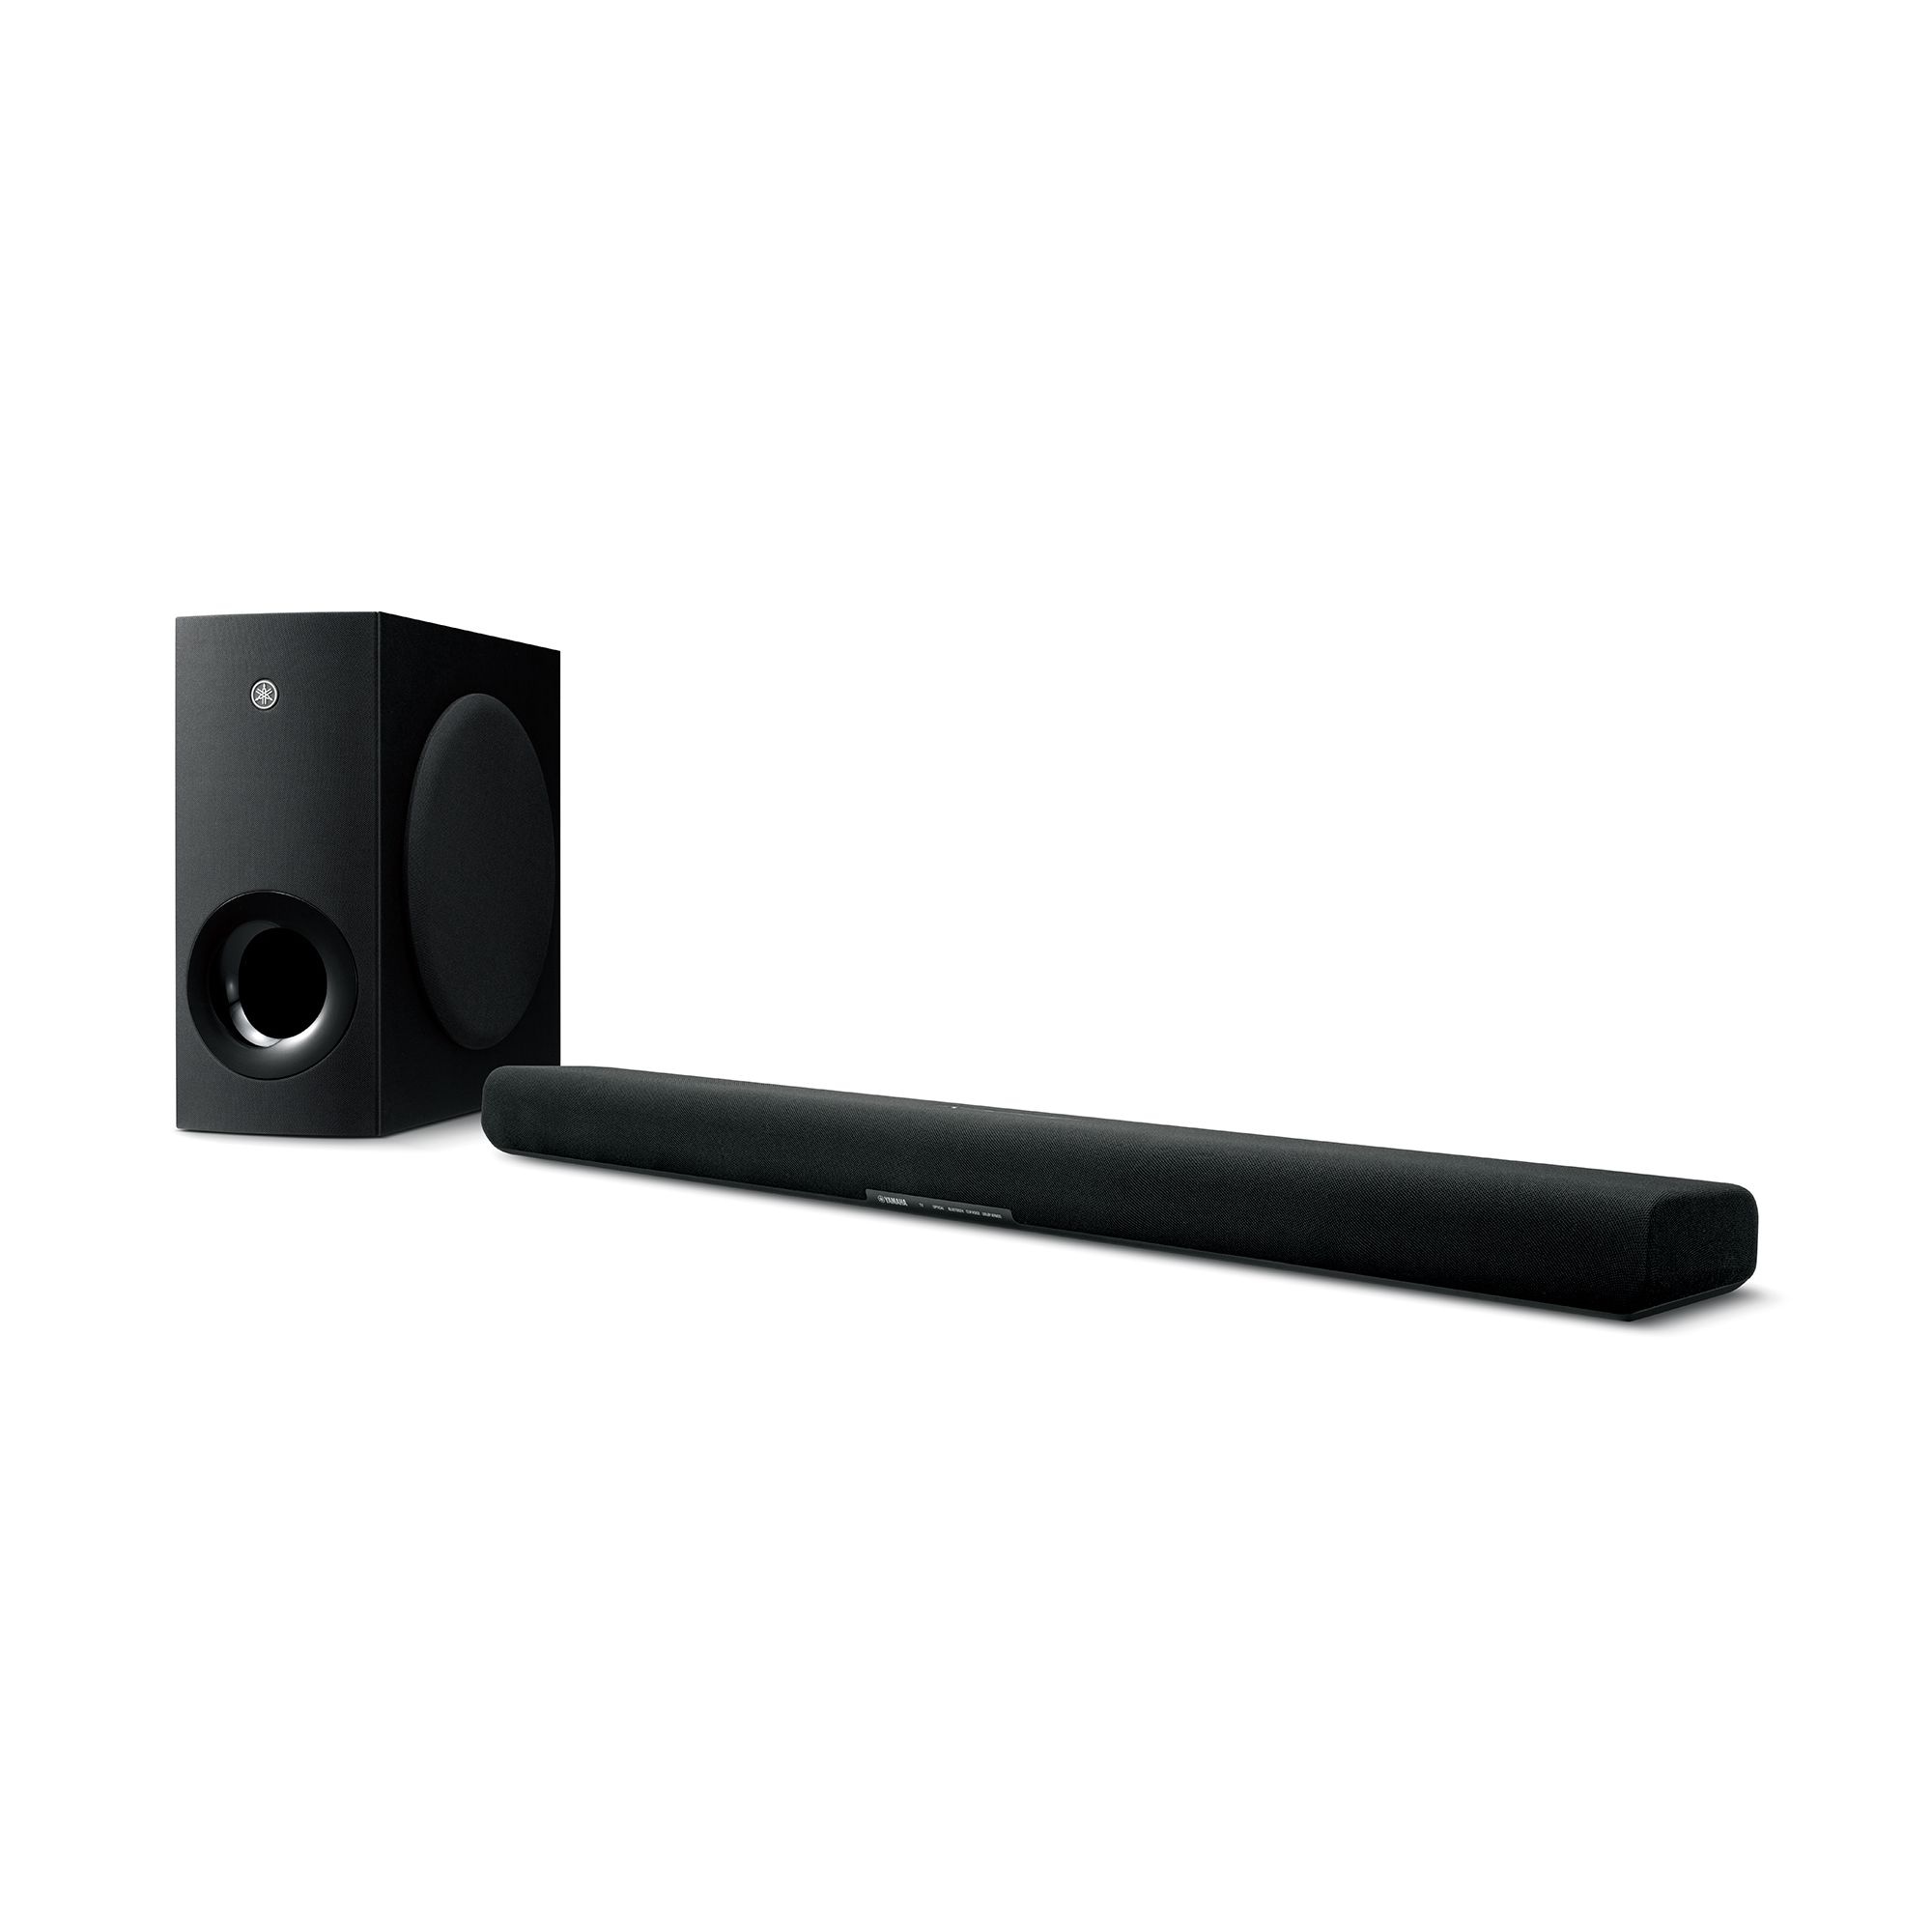 SR-B40A Dolby Atmos Sound Bar with Wireless Subwoofer